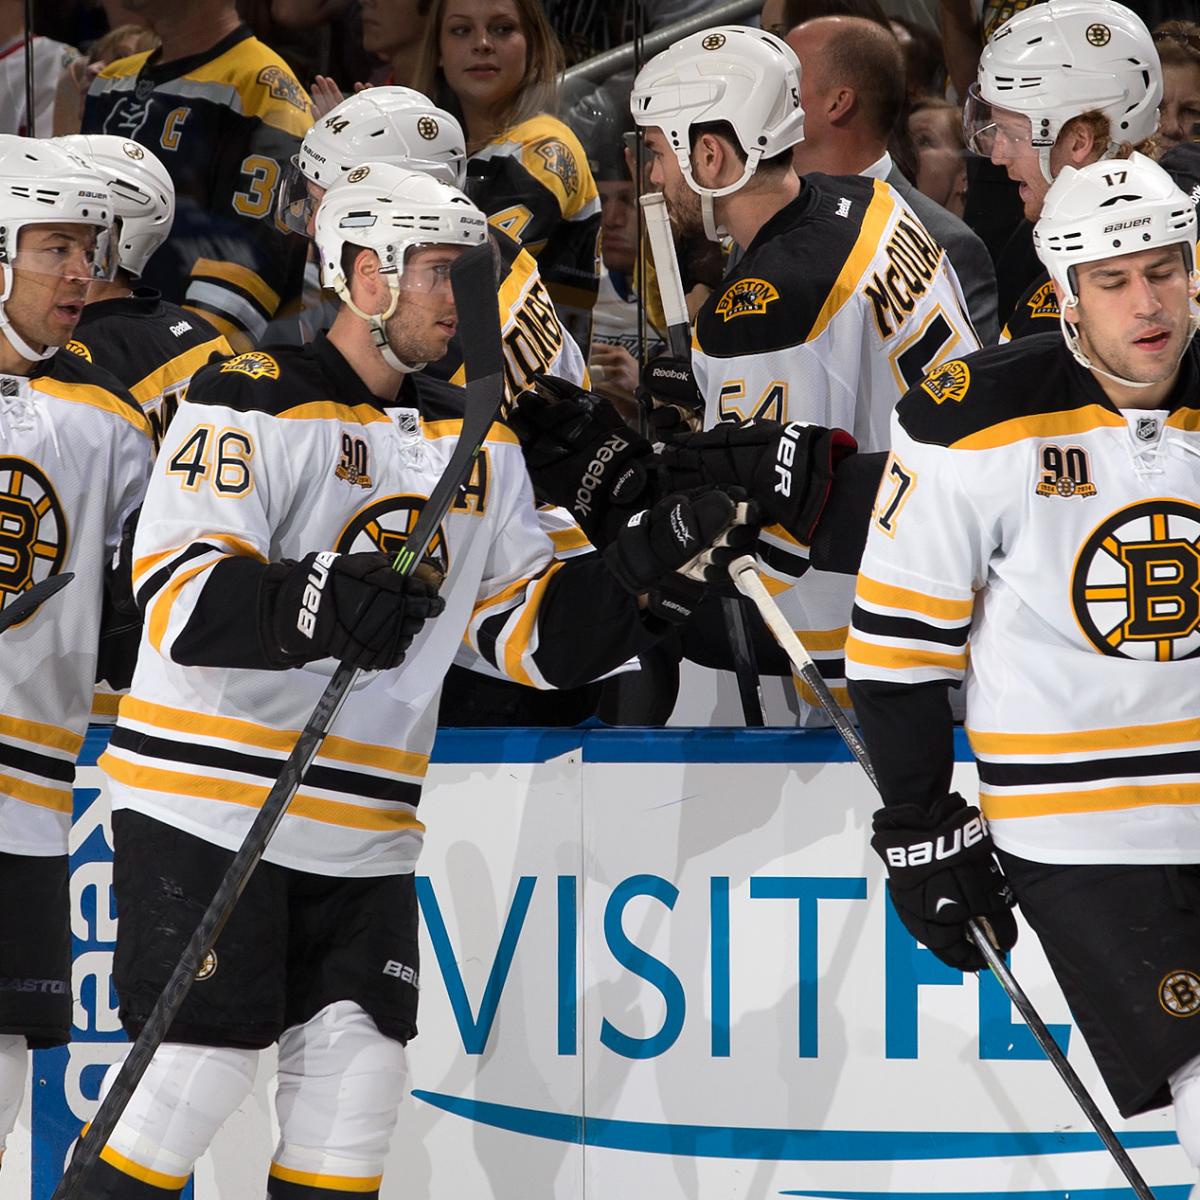 Milan Lucic looks forward to lining up with Jarome Iginla – Boston